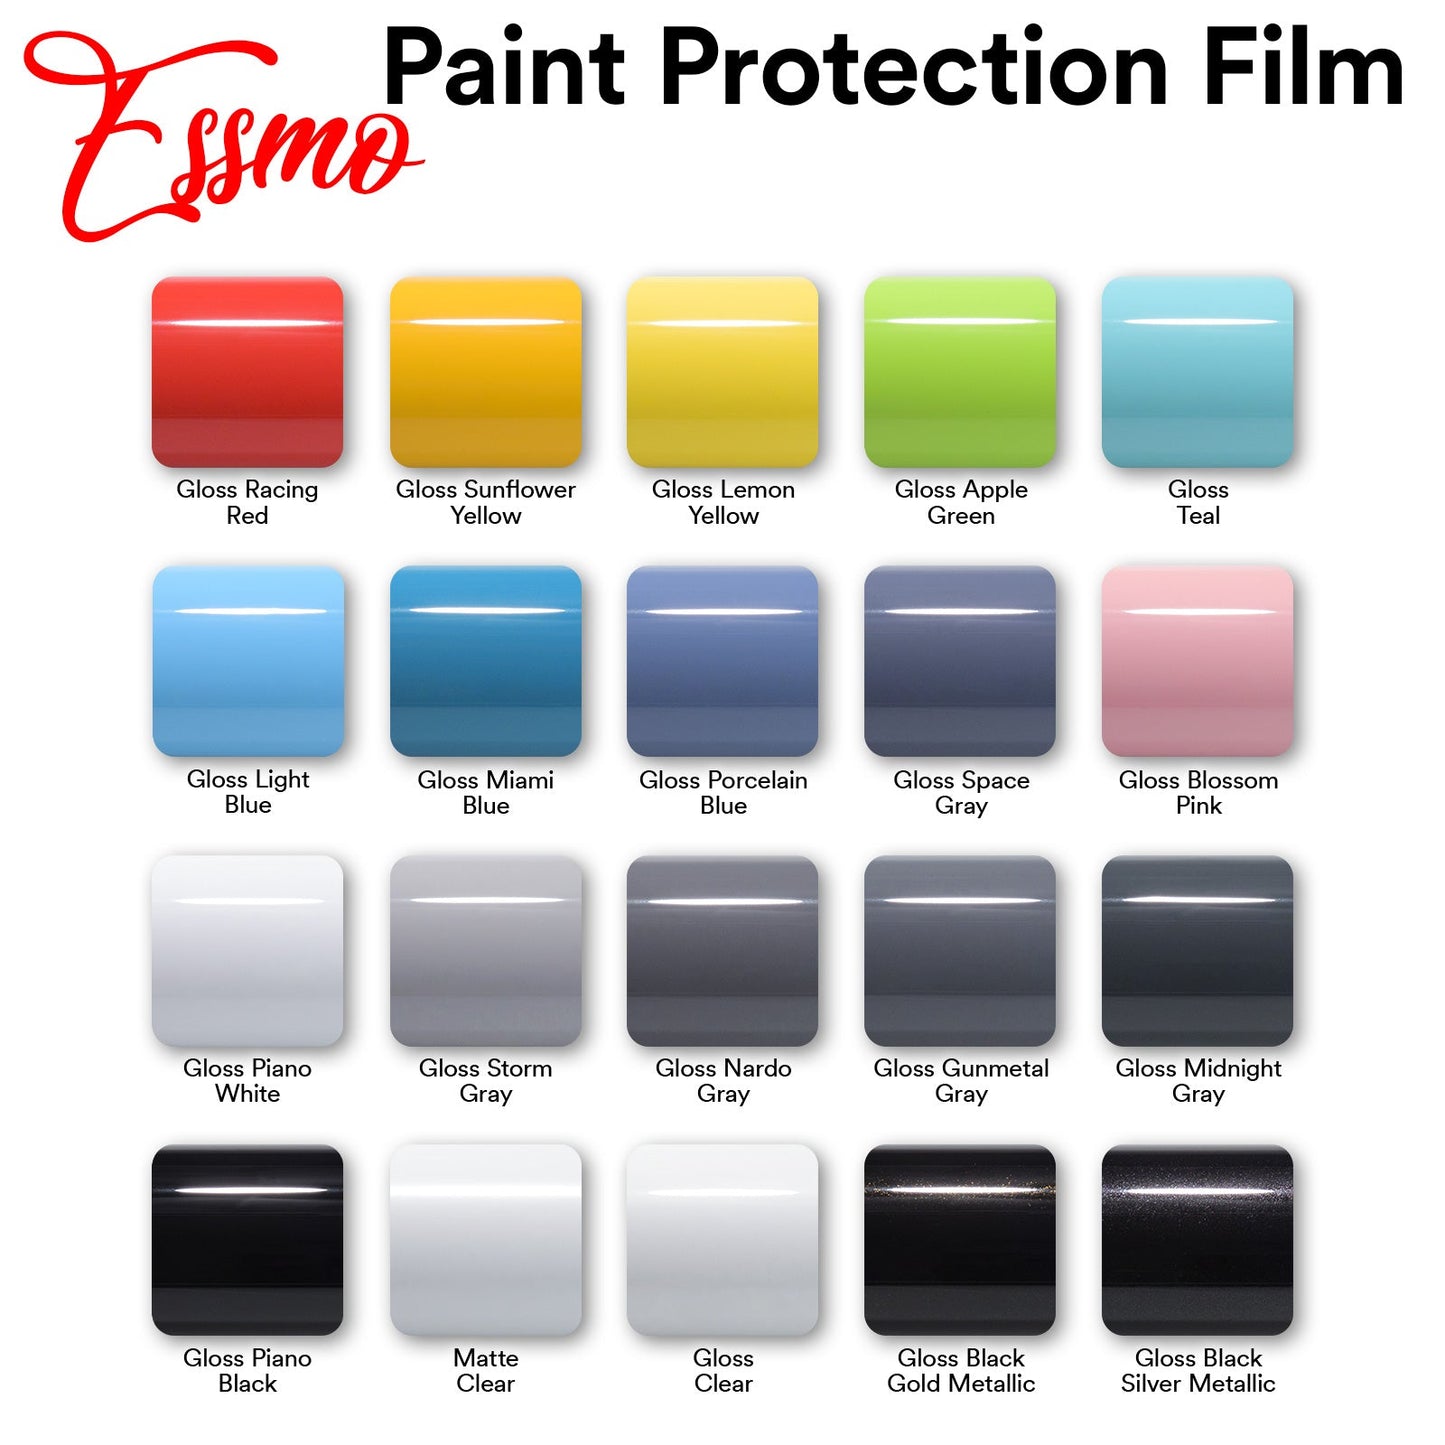 ESSMO Piano White Paint Protection Film Gloss